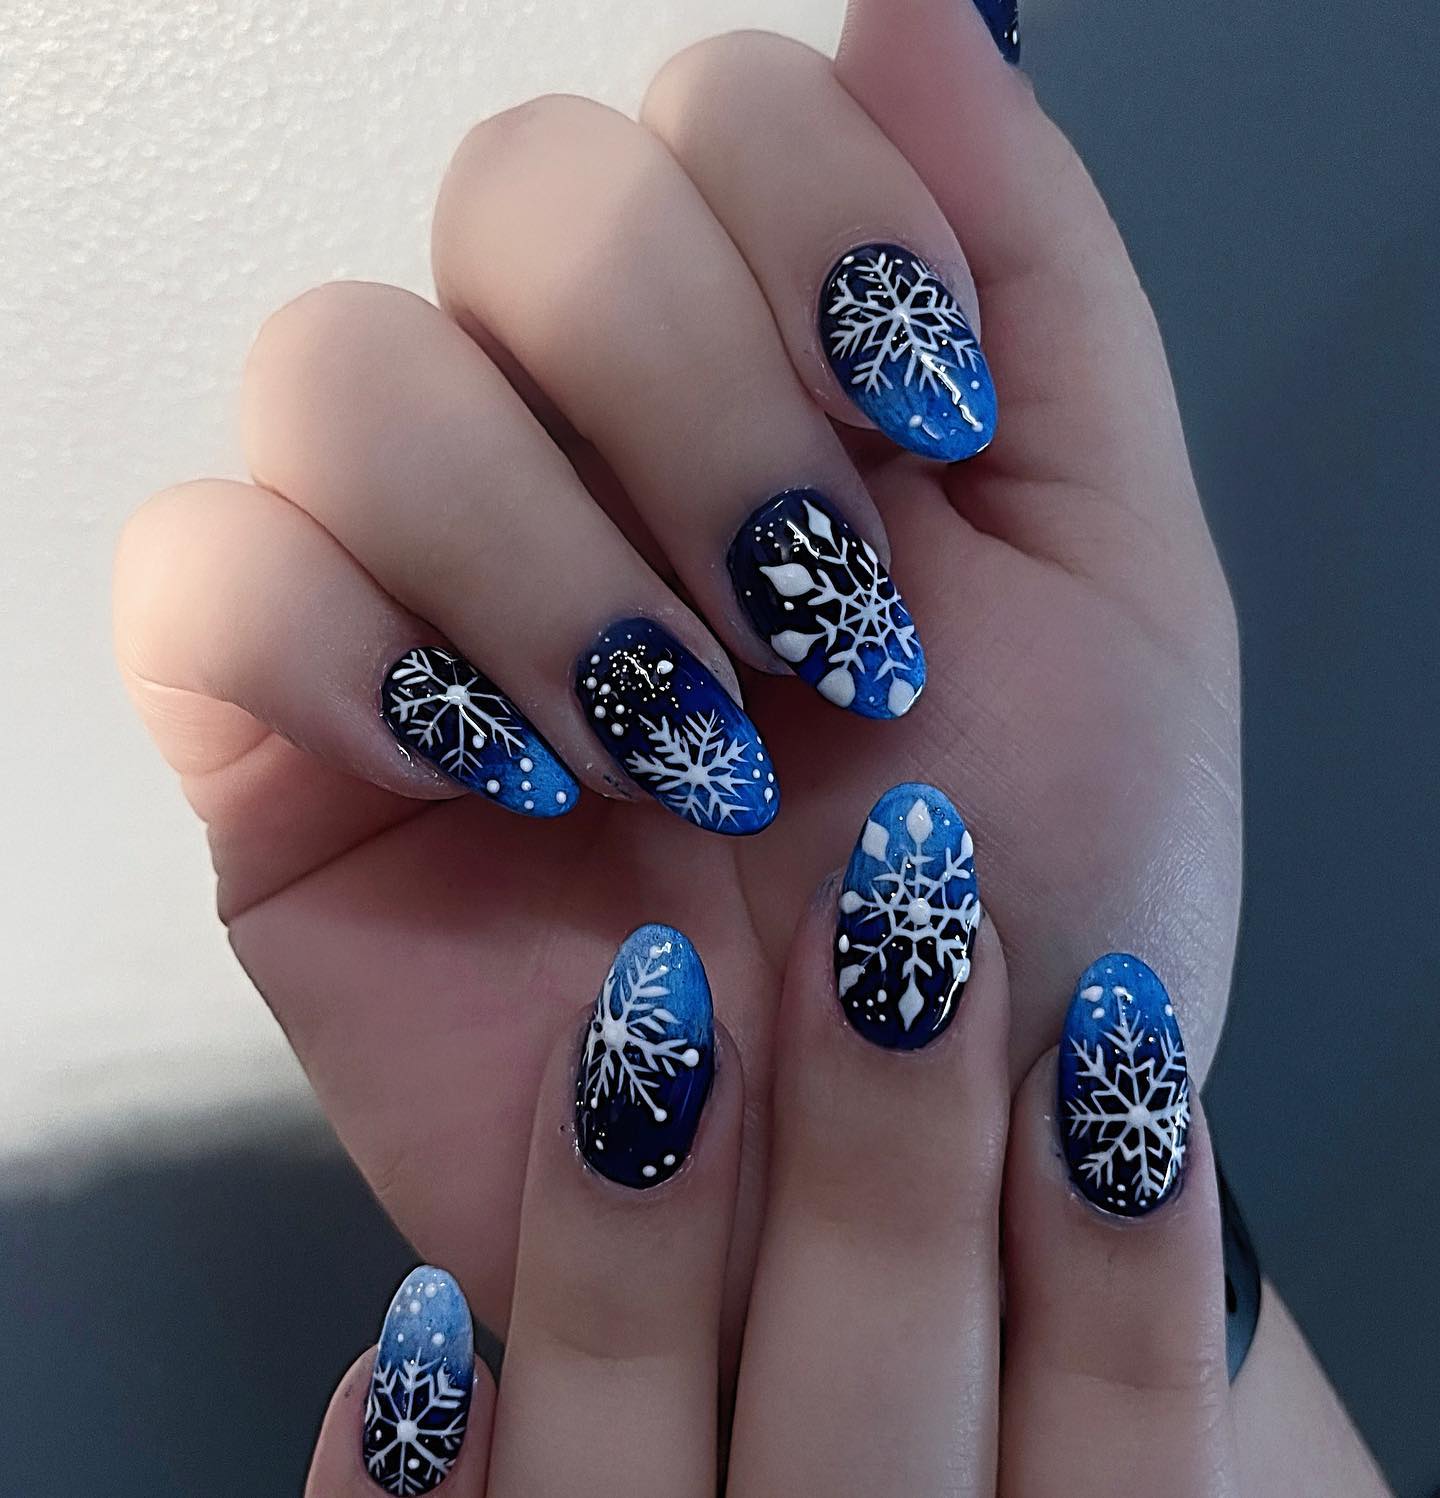 Lily's nail art design 202 Main St, Ansonia Connecticut 06401